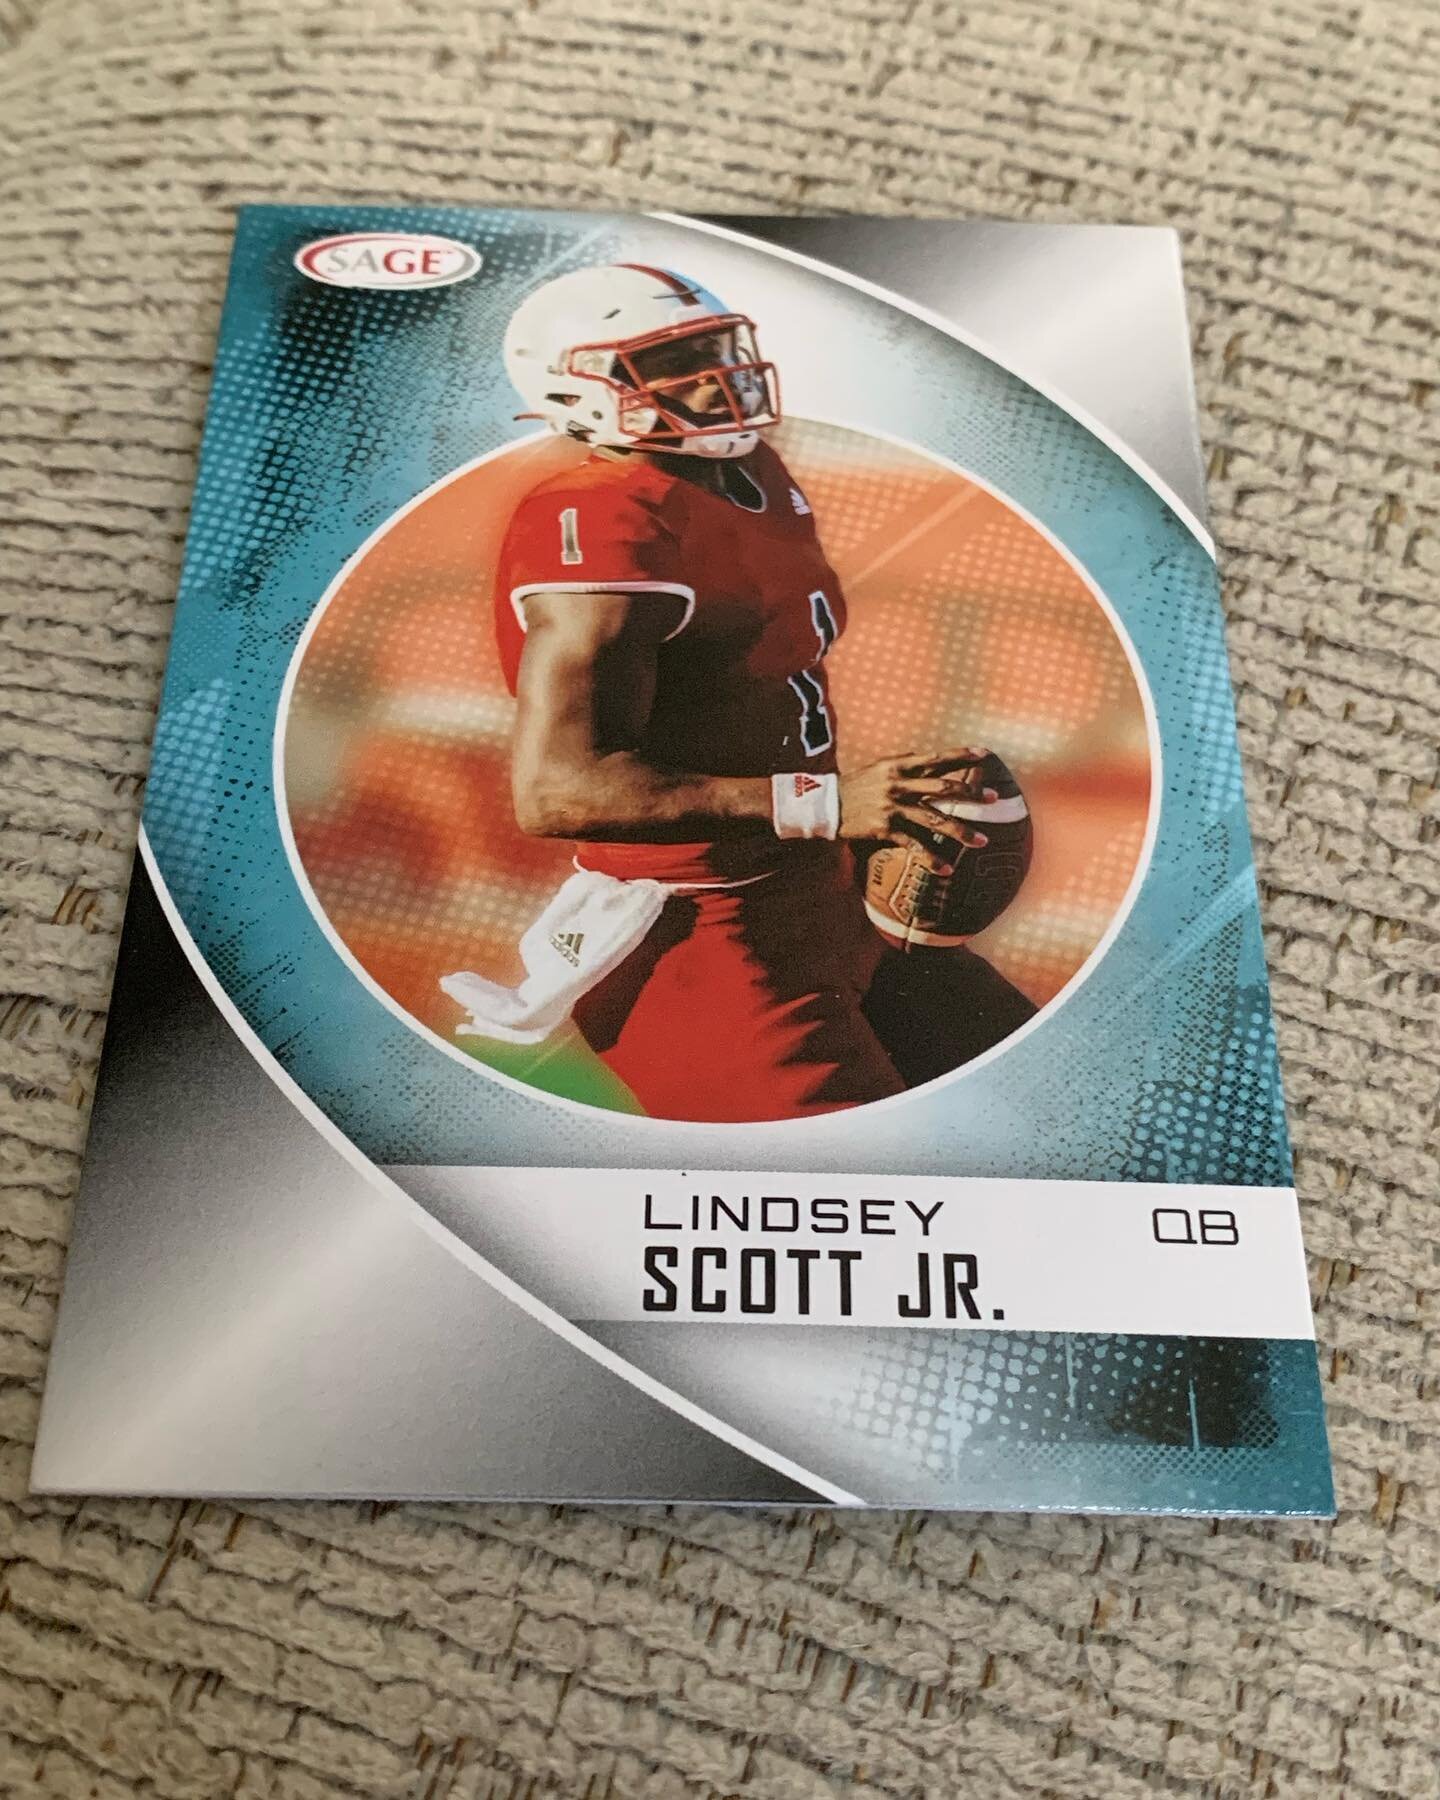 When you buy a pack of football cards at your local Wal-Mart and get someone you know. Awesome find by our very own Andy Seaman! 

It&rsquo;s a great day to be alive and to be a Cardinal! 👌

#uiw #uiwfootball #uiwathletics #uiwcardinals #uiwpride #u